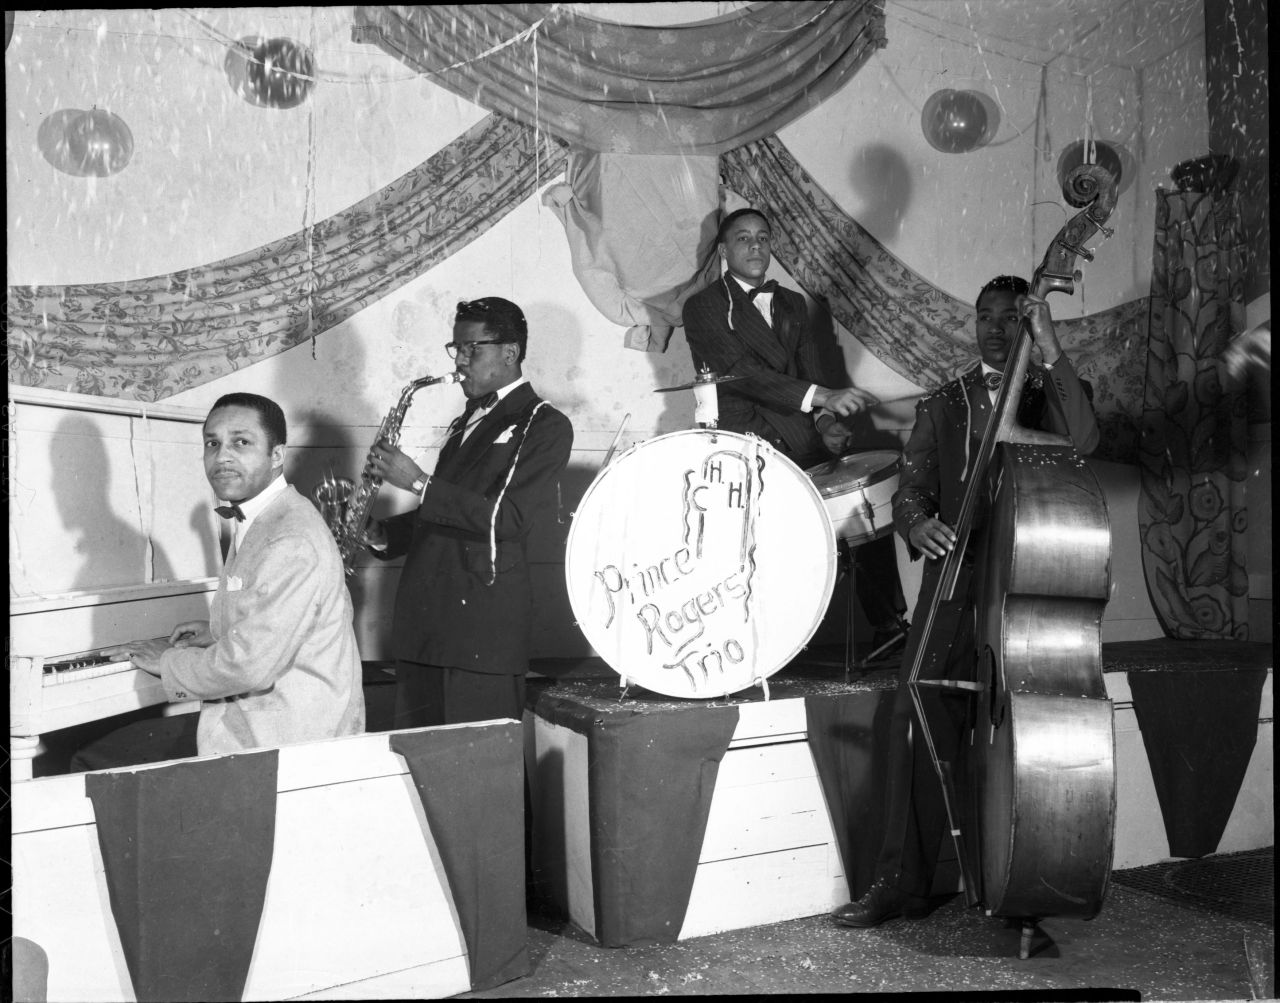 Prince Rogers Trio John Lewis Nelson (1916-2001) arrived in Minneapolis from Louisiana in 1948, and started the Prince Rogers Trio with other local musicians. Nelson (left, in the above photo) adopted “Prince Rogers” as a stage name and later gave...